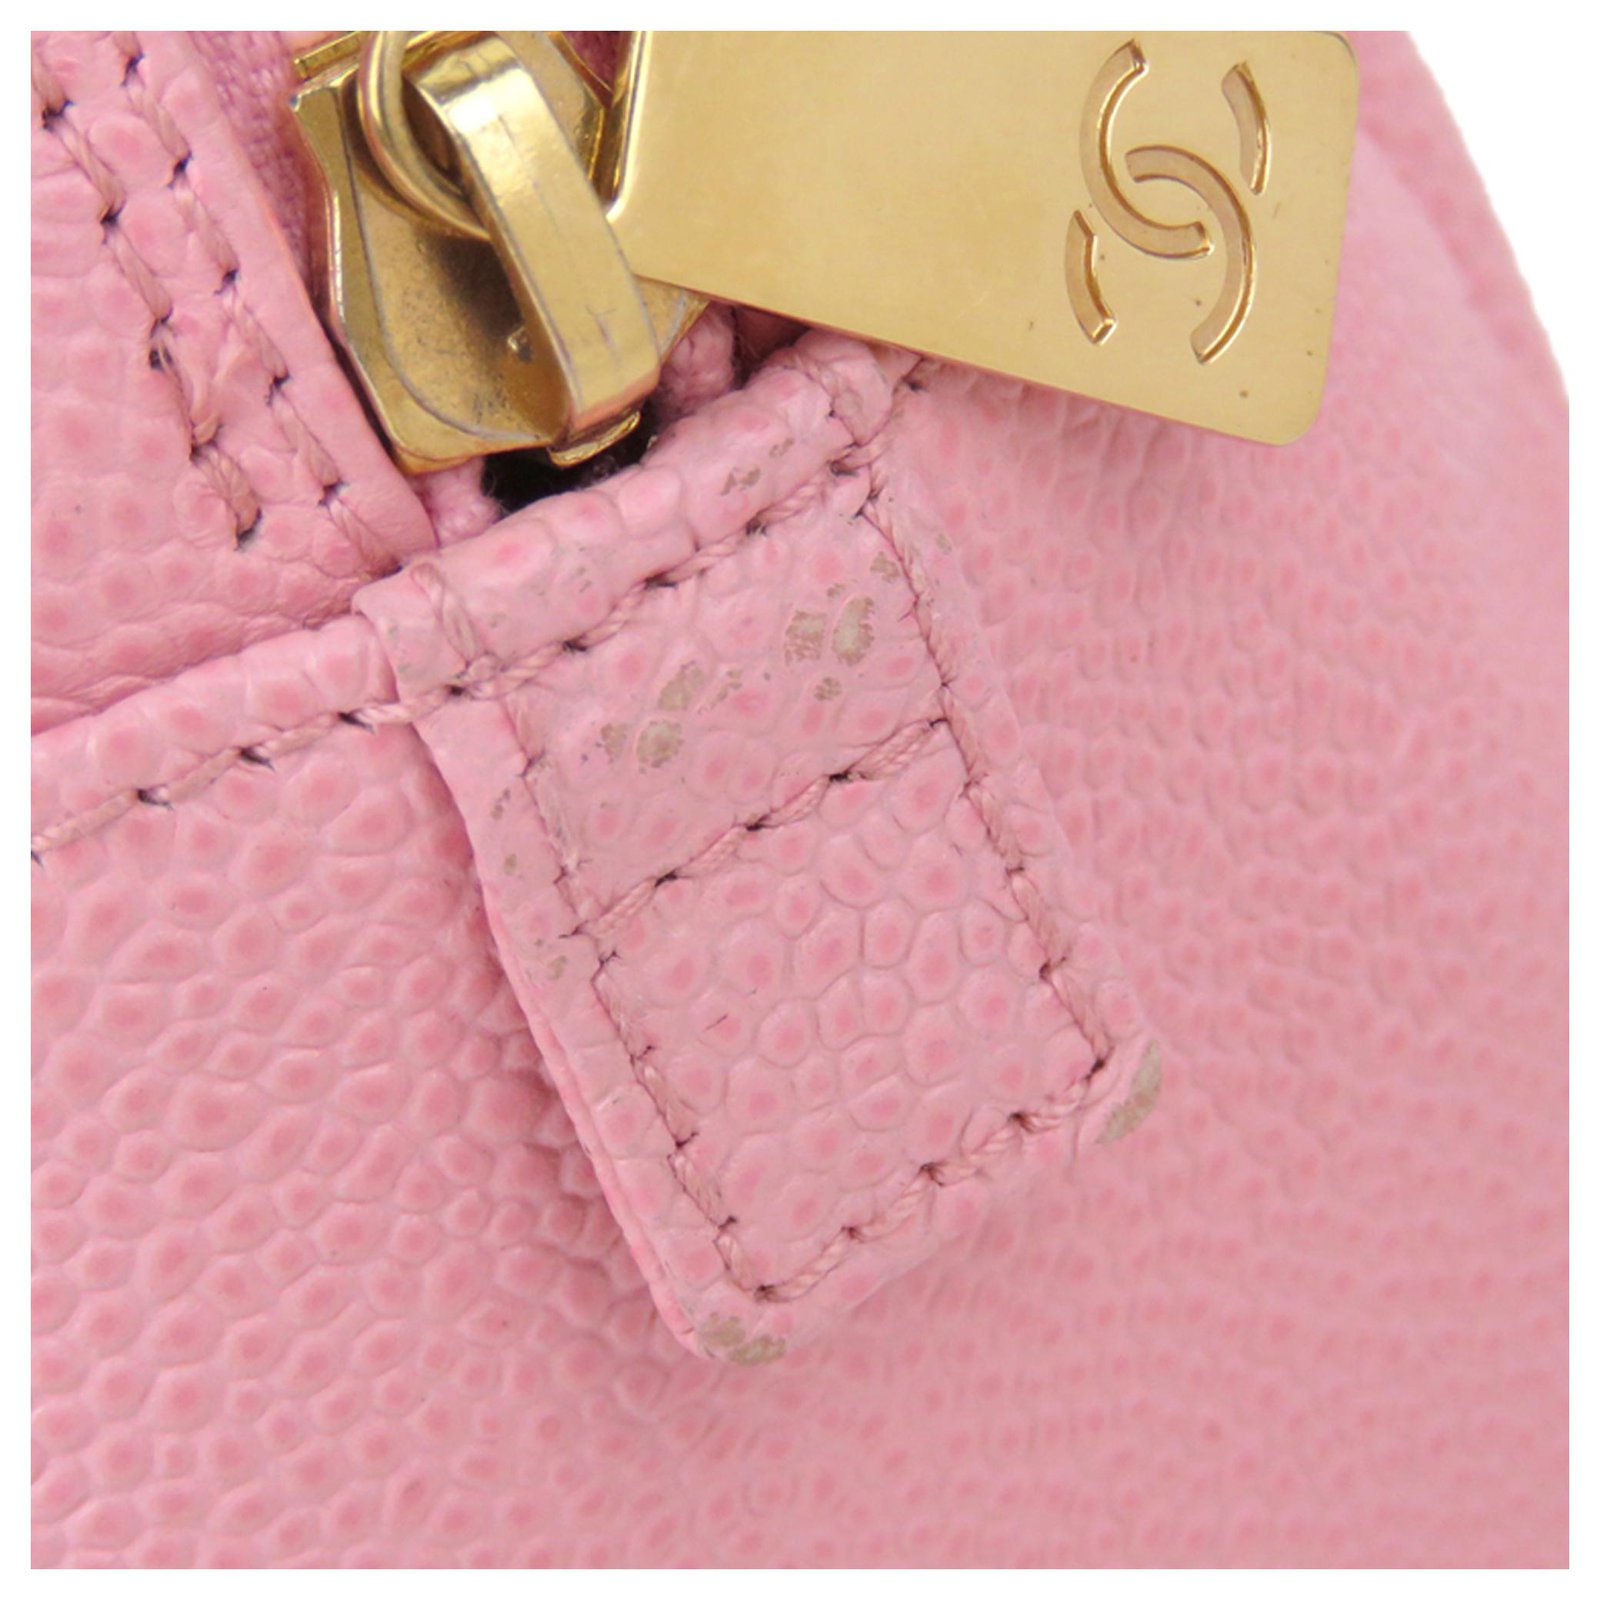 Chanel Pink Caviar Petite Timeless Shopping Tote Leather ref